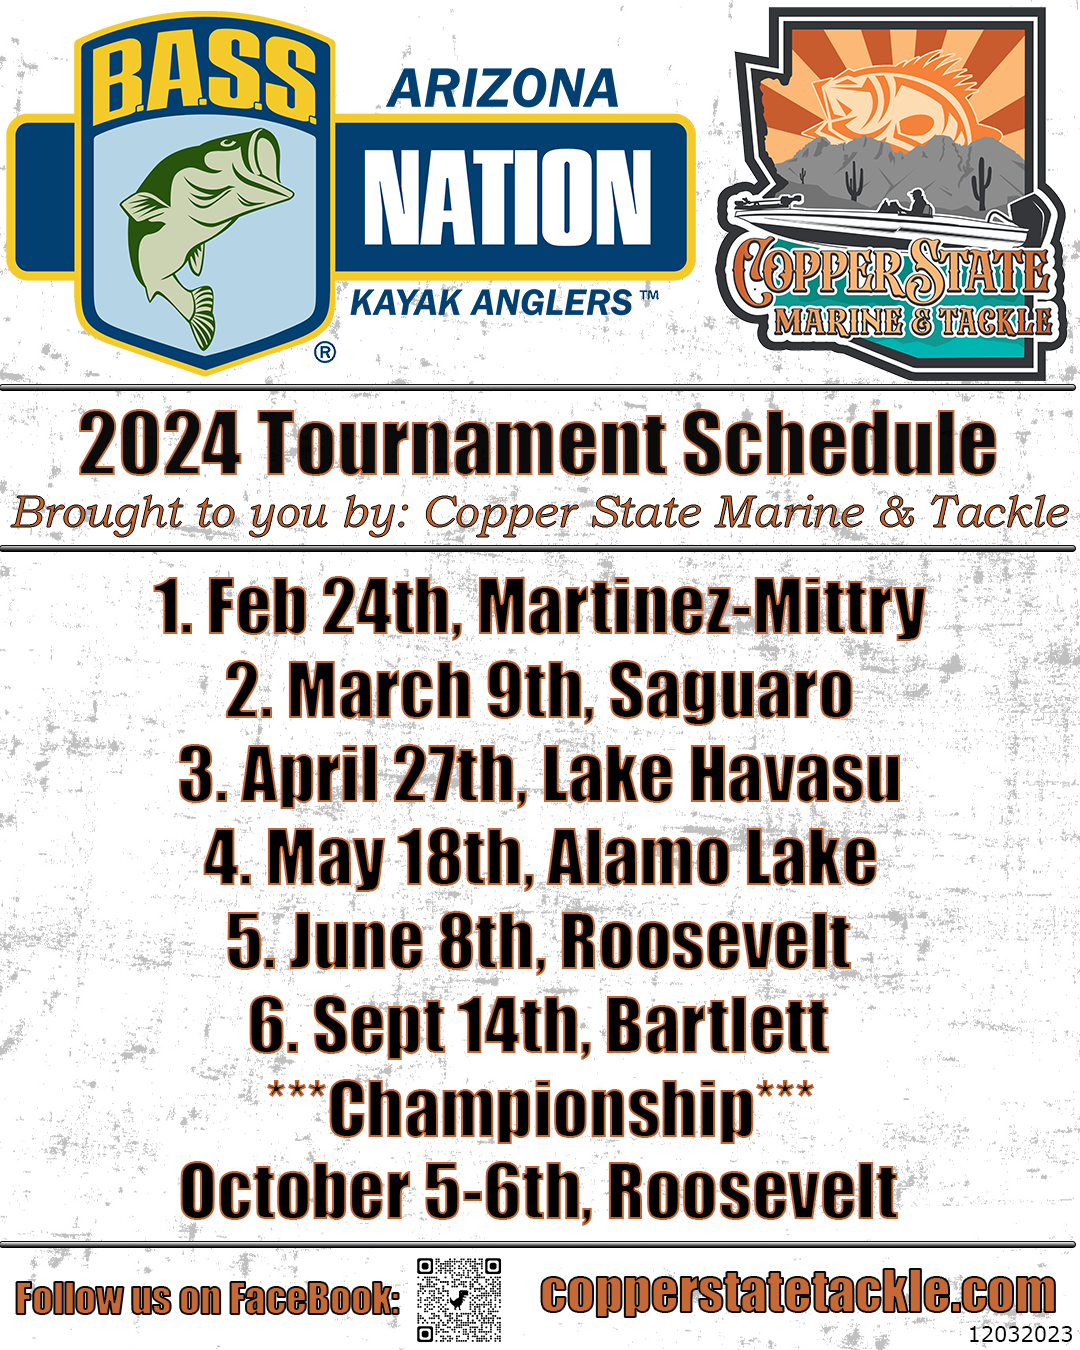 The 2024 schedule for AZBN